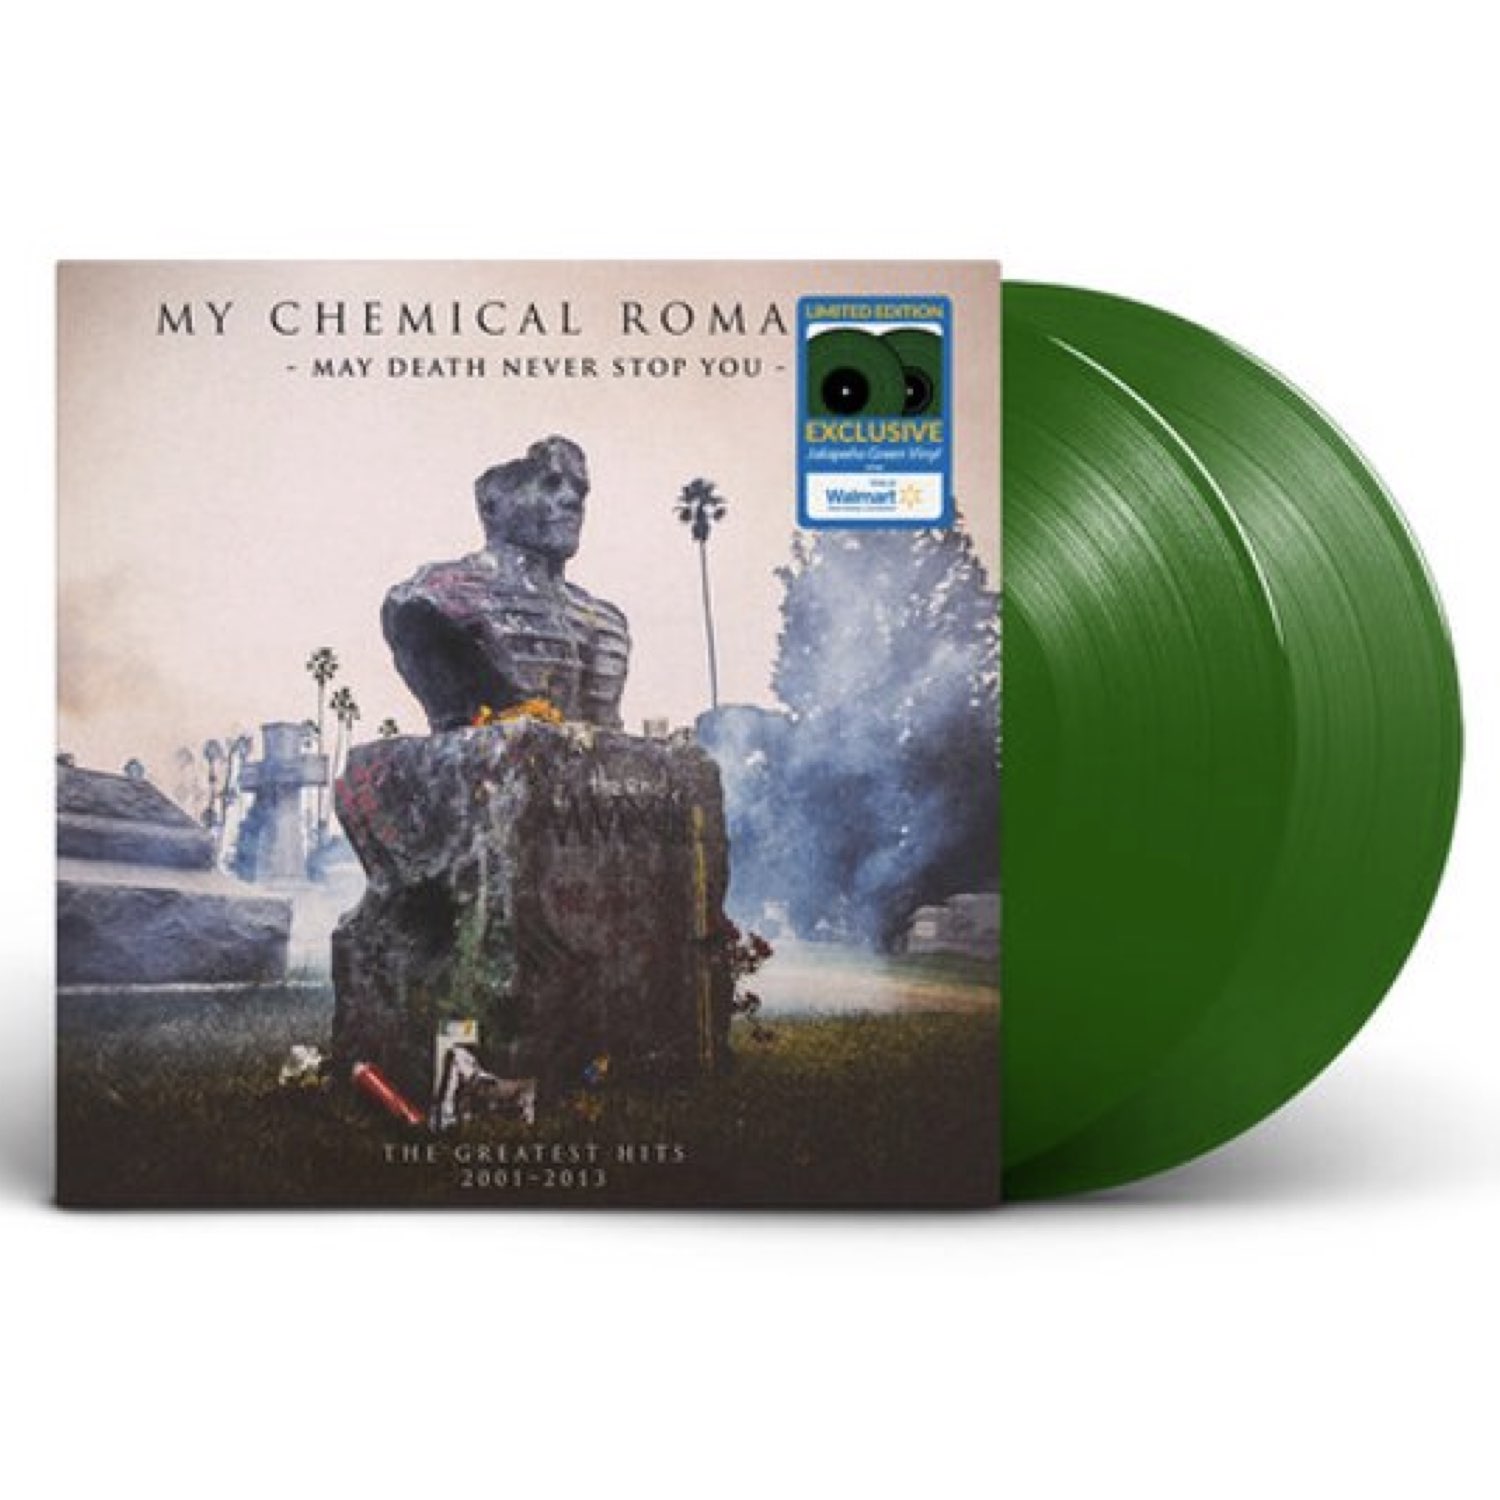 My Chemical Romance - May Death Never Stop You - The Greatest Hits 2001-2013 [Double Jalapeño Green Vinyl] - Walmart Exclusive